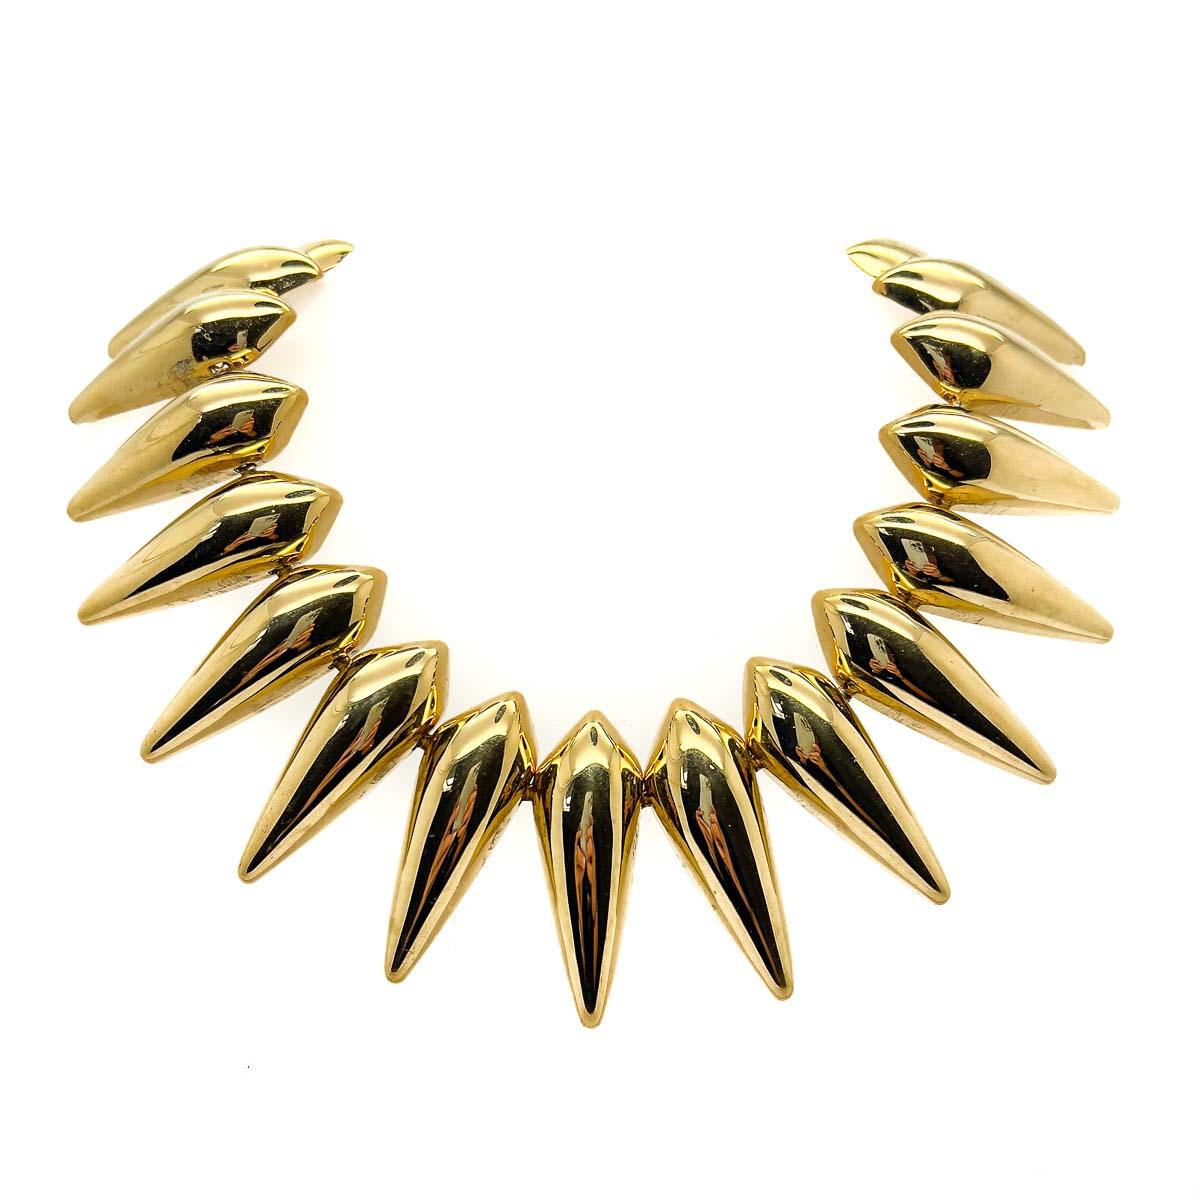 A spectacular Vintage Monet Sunburst Collar and Cuff, one of Monet's most impressive designs. Lustrous high quality gold plate is the perfect finish for this glamorous yet contemporary stylised sunburst design. An eternally stylish piece of wearable